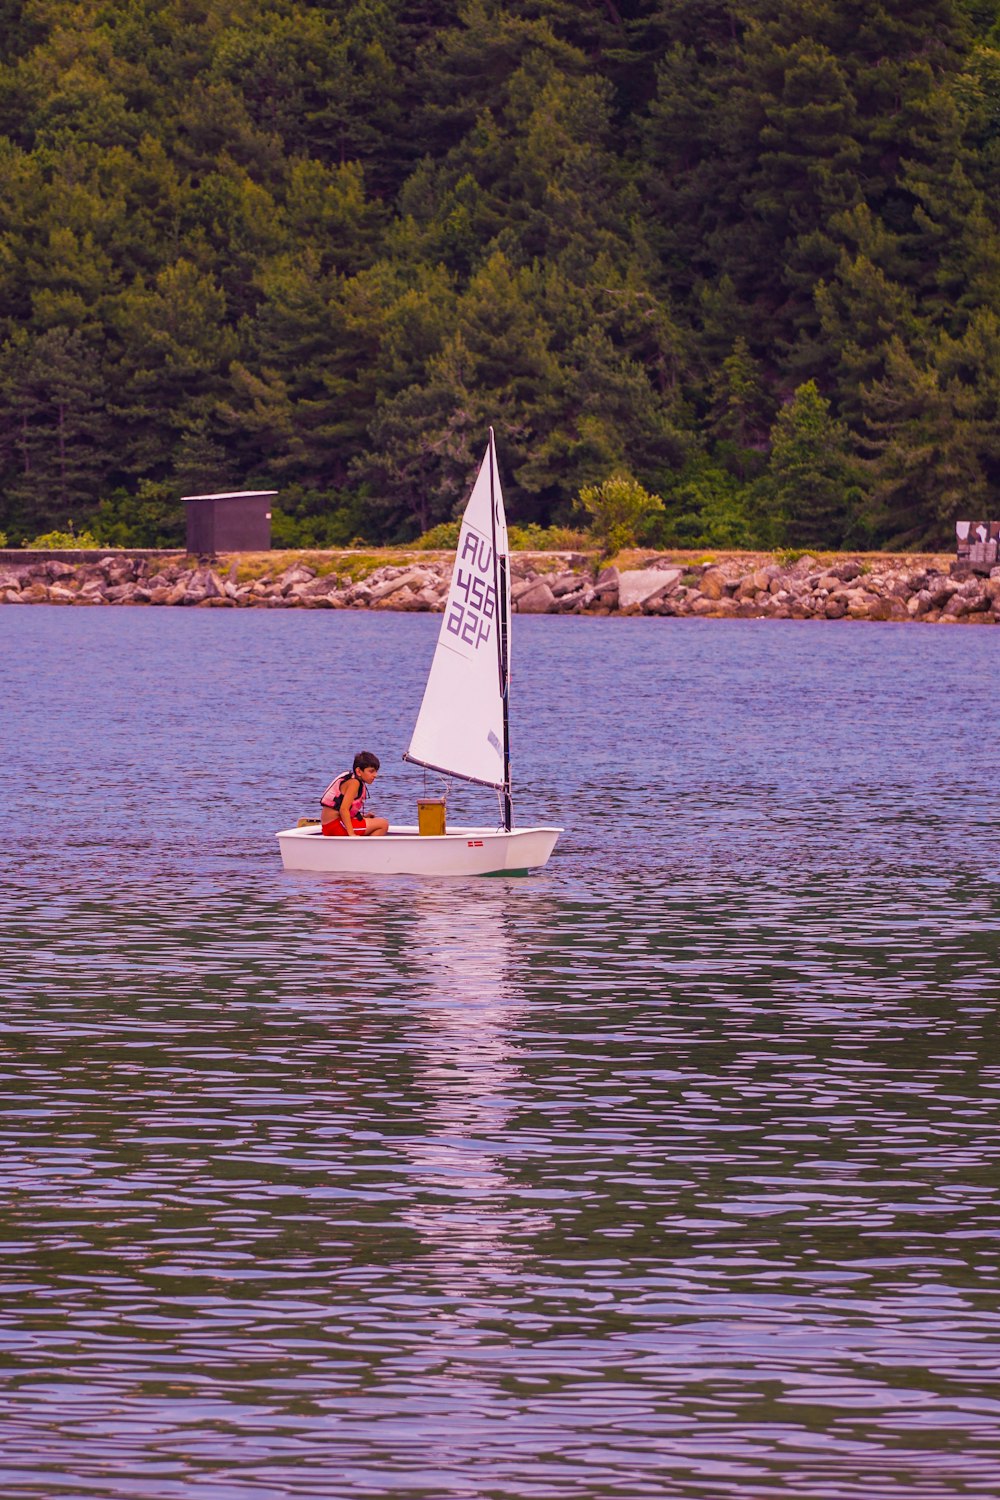 person riding on white and yellow boat on body of water during daytime